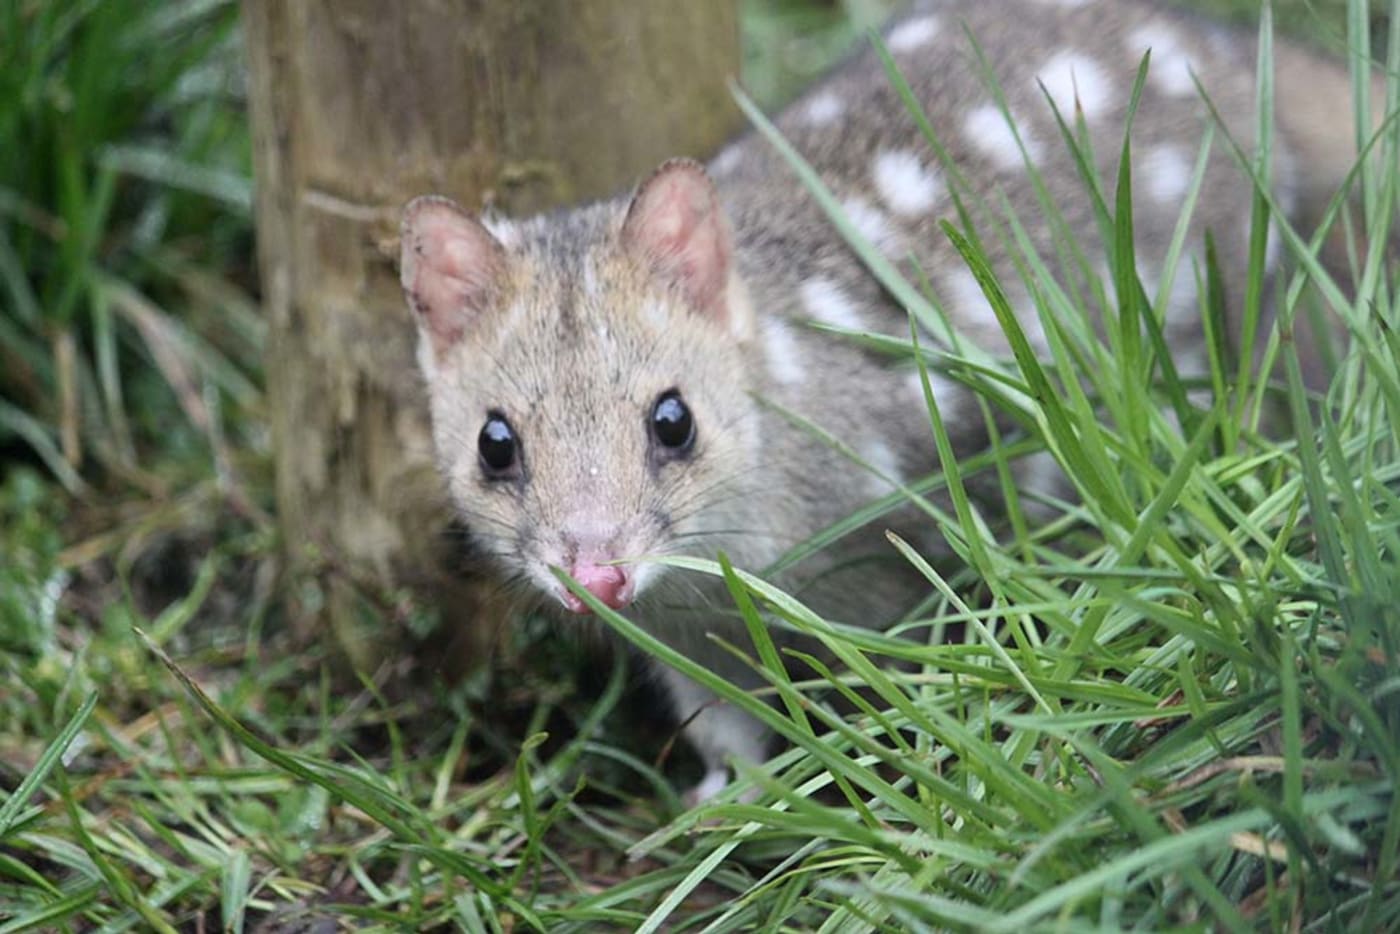 Eastern quoll at the Devils@Cradle conservation facility, Cradle Mountain, Tasmania